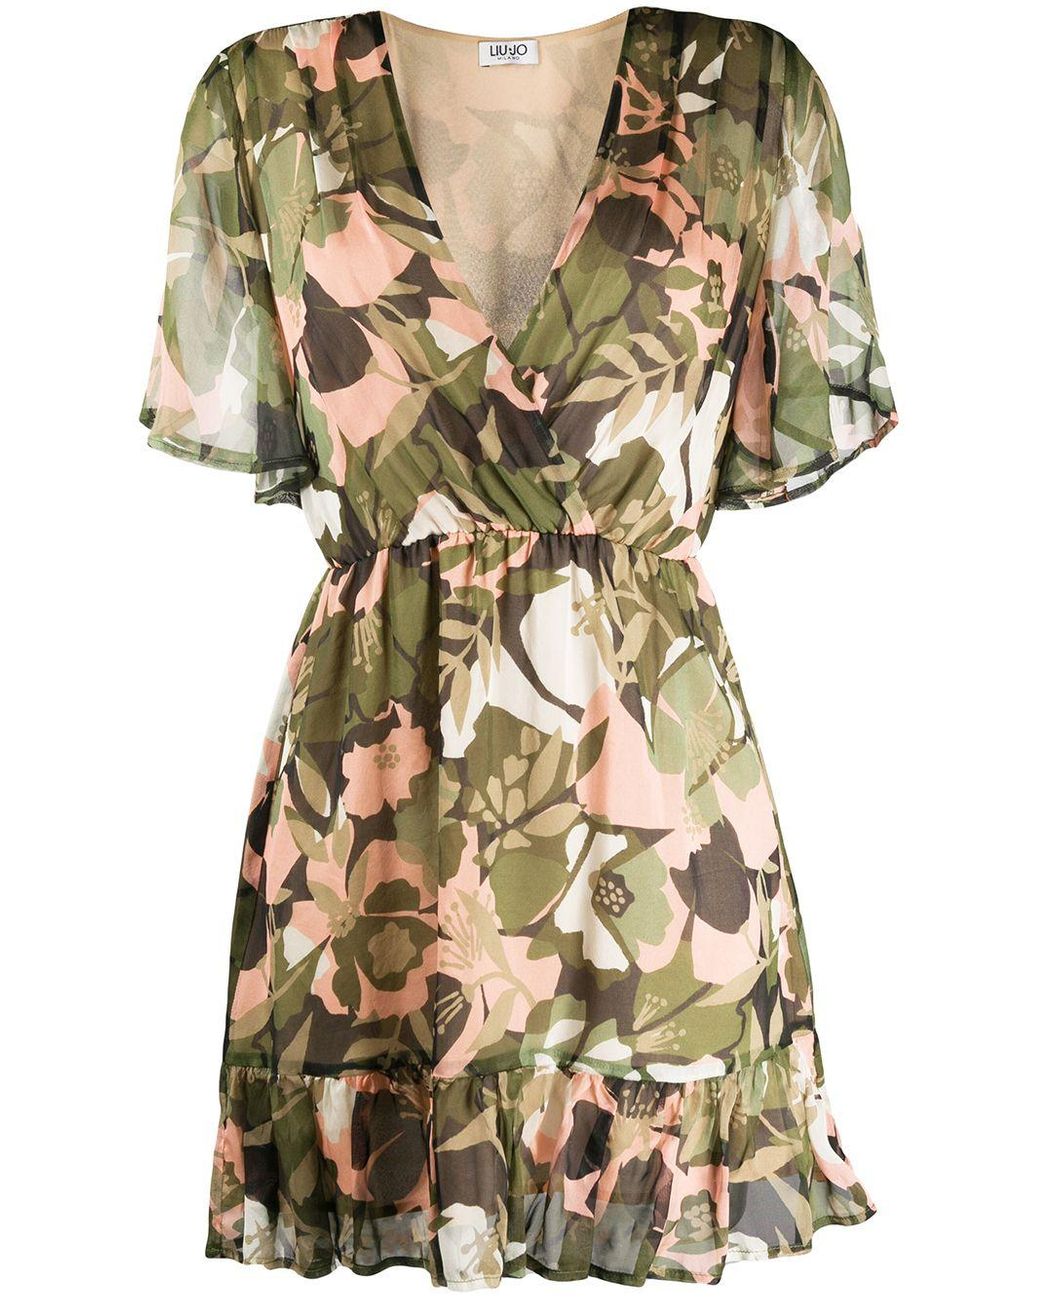 Liu Jo Synthetic V-neck Floral Camouflage Print Dress in Green - Lyst